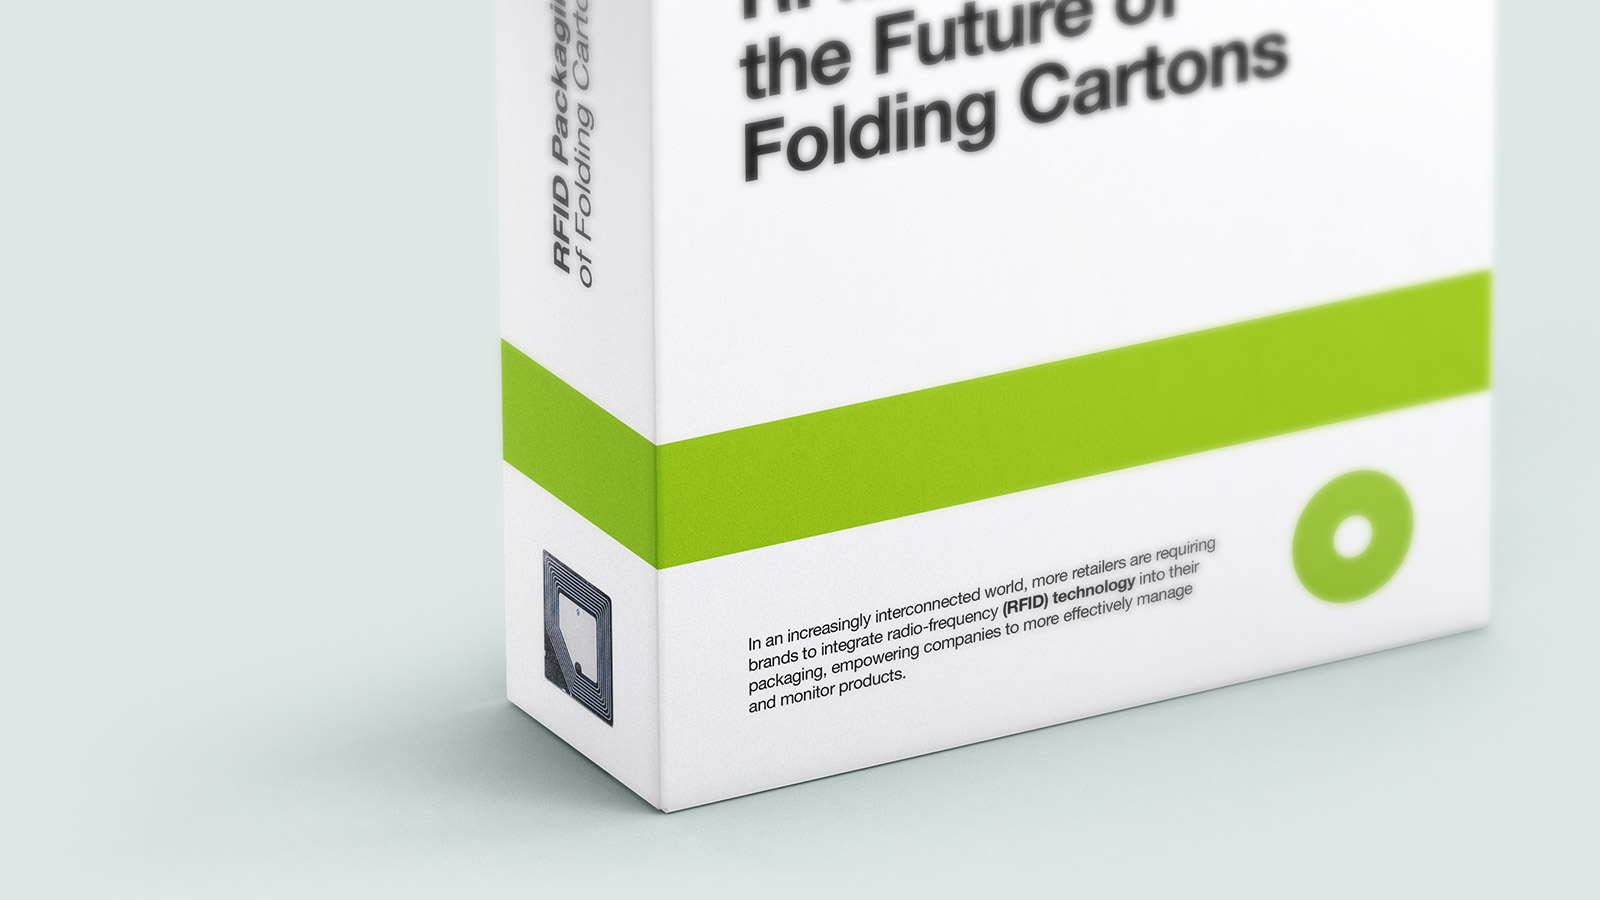 RFID Packaging & the Future of Folding Cartons